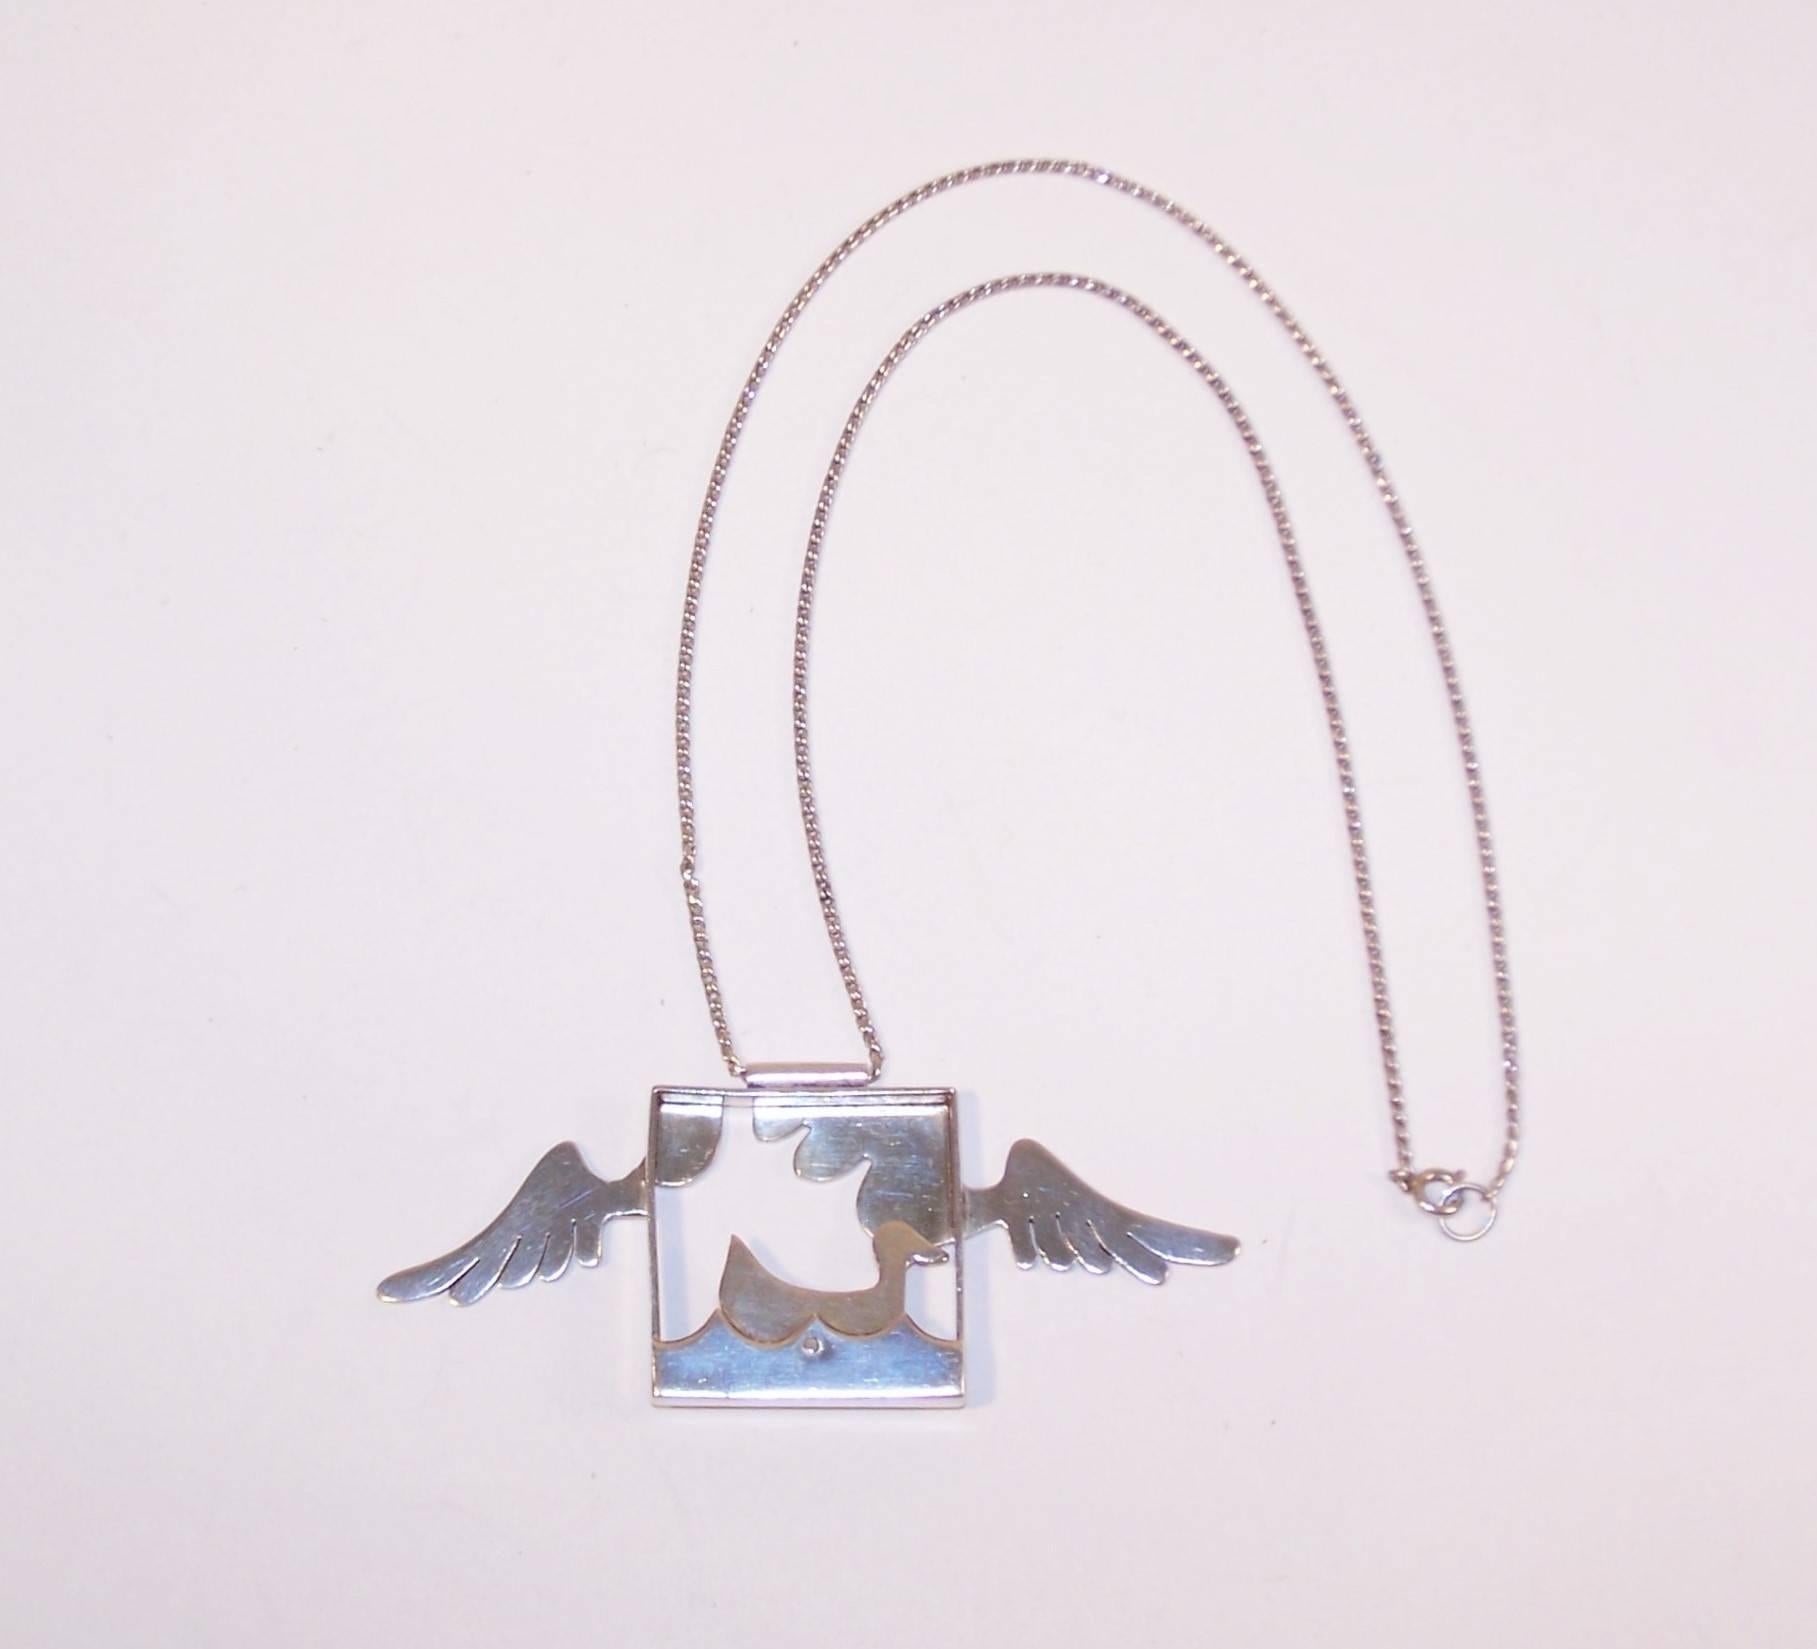 Artisan Whimsical 1970's Sterling Silver Surreal Articulated Duck Necklace